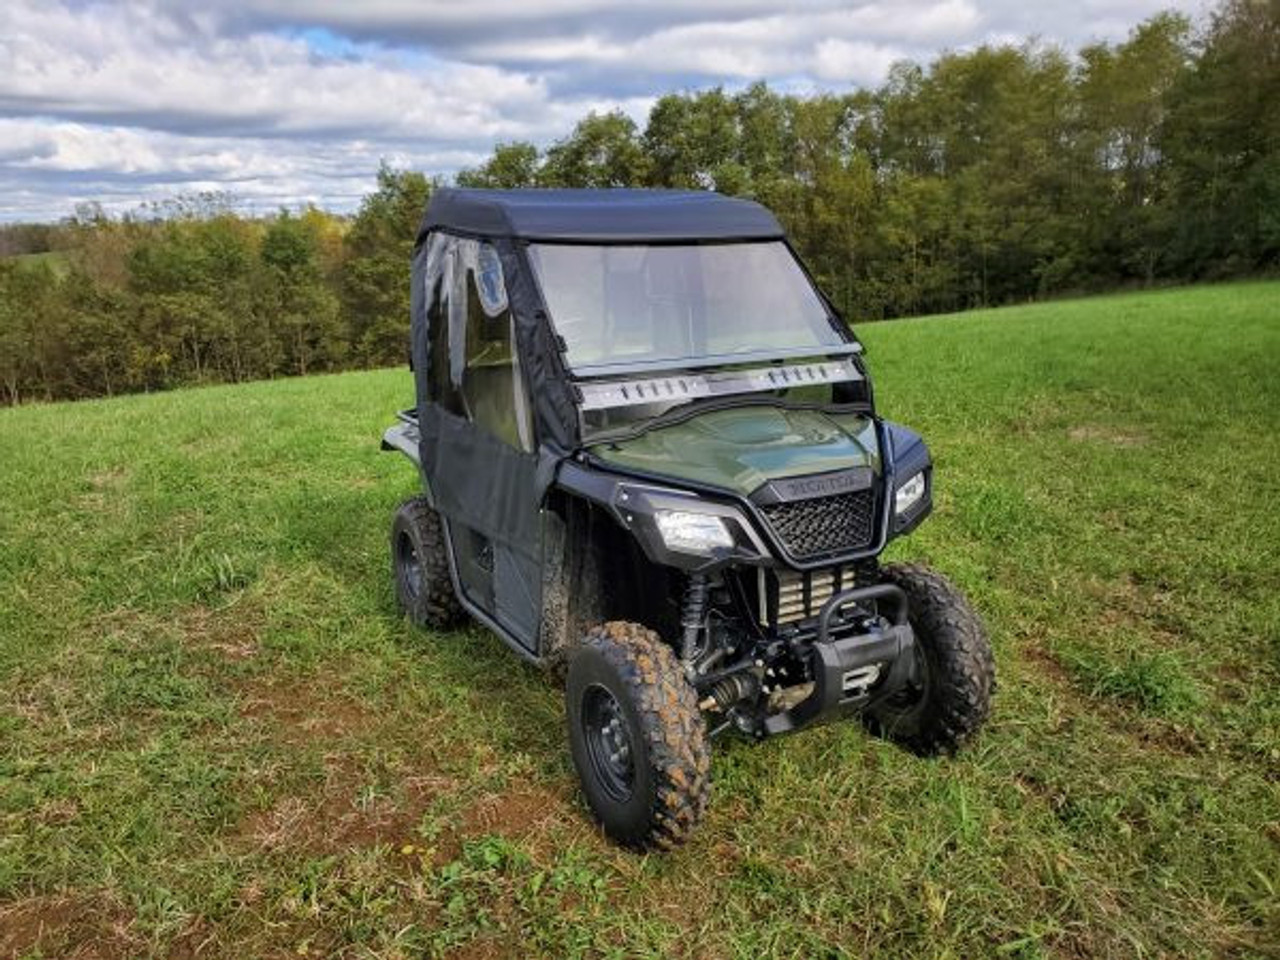 3 Star side x side Honda Pioneer 500/520 doors and rear window front angle view